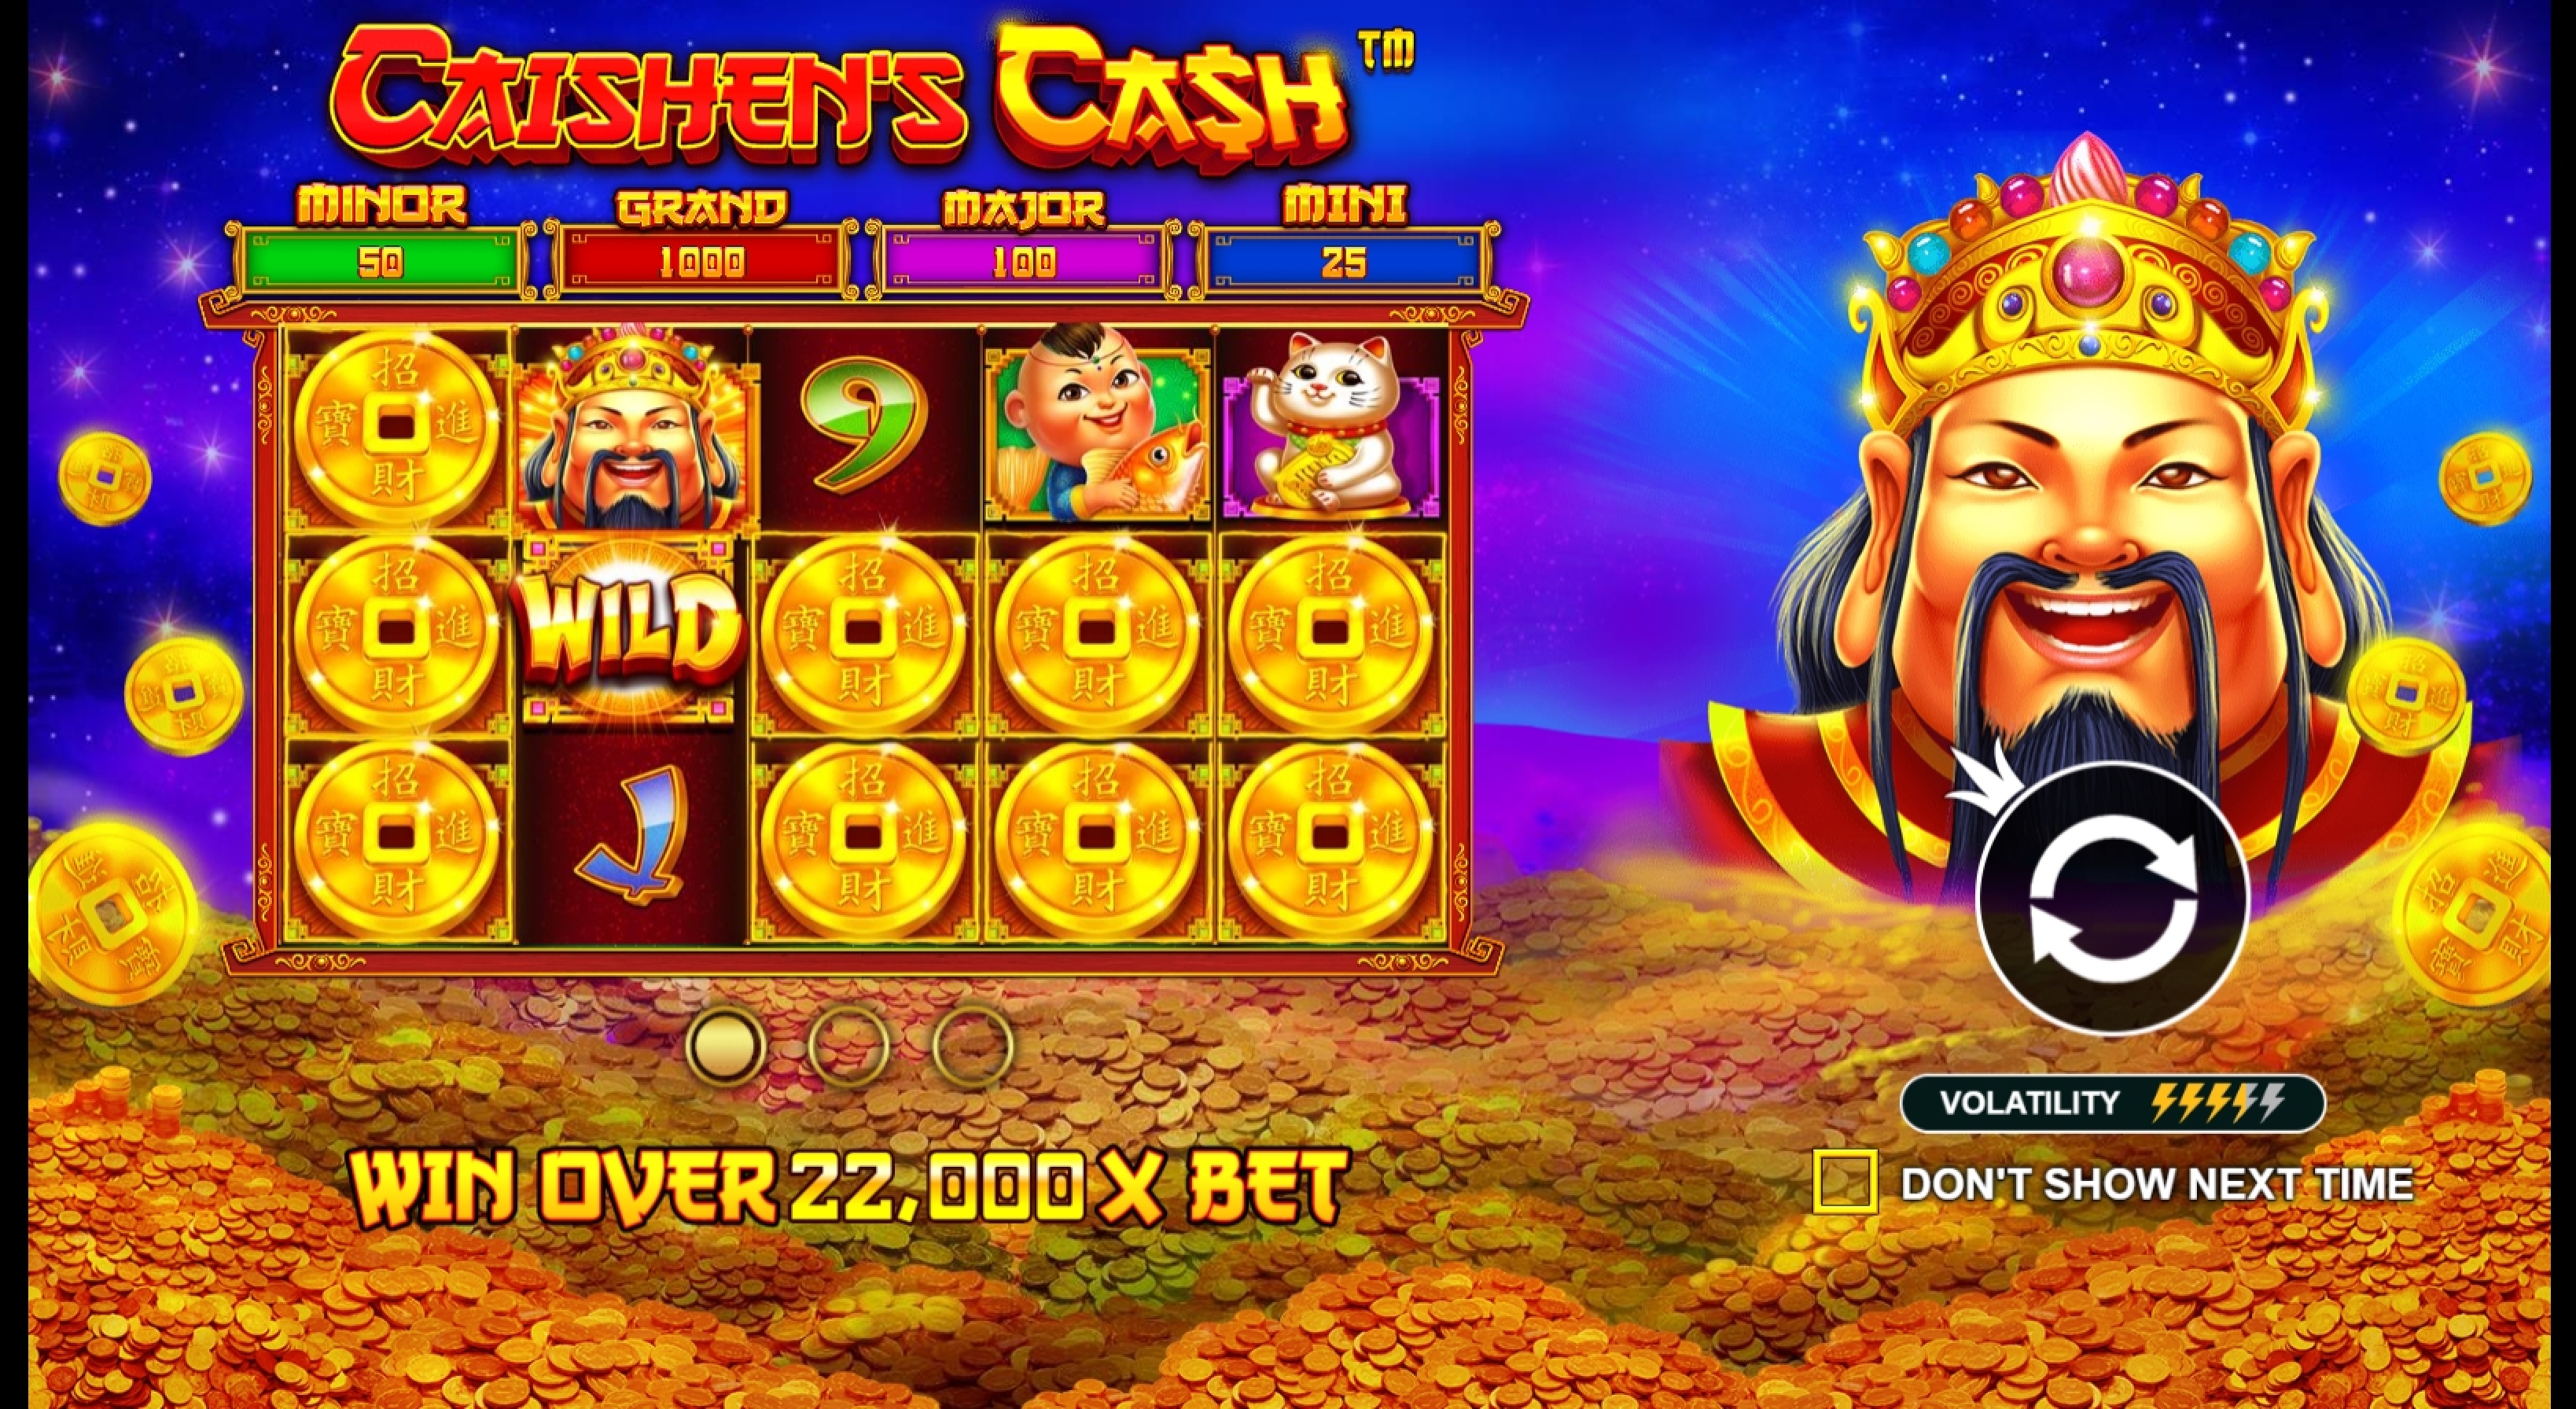 Play Caishen's Cash Free Casino Slot Game by Pragmatic Play